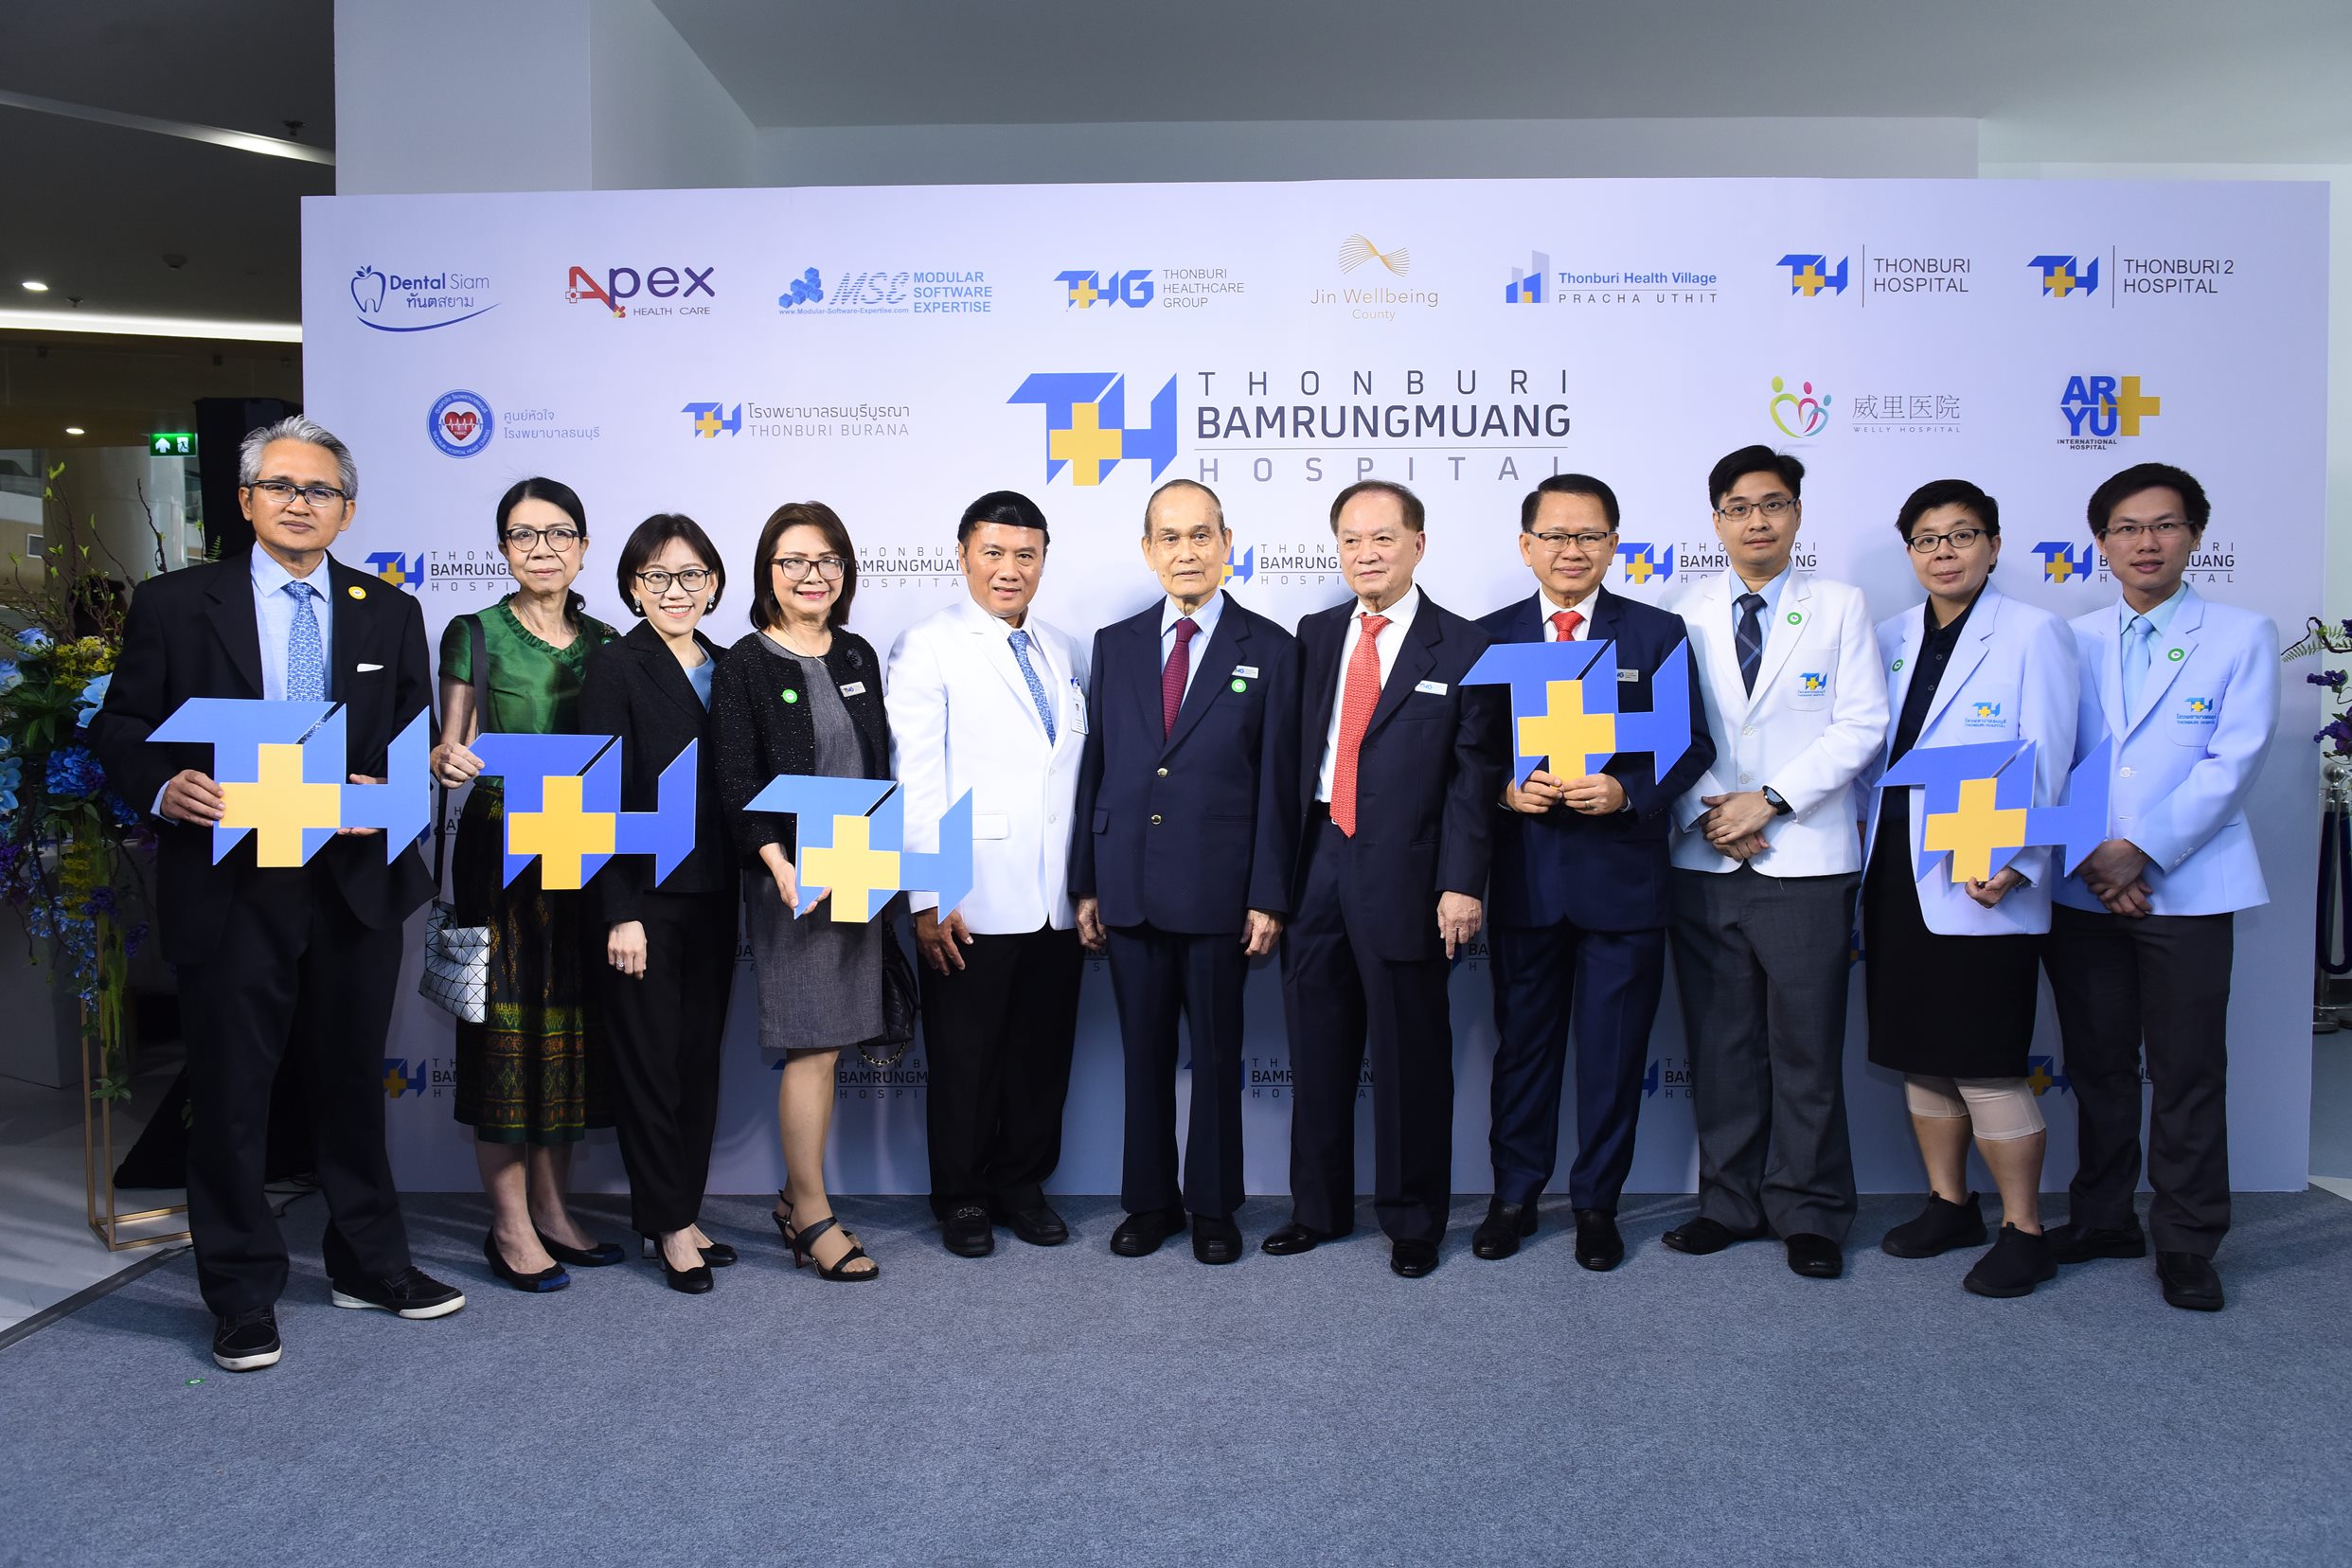 Mileage Group drives publicity for Thonburi Healthcare Group’s Medical Centre in Bangkok throughout Asia